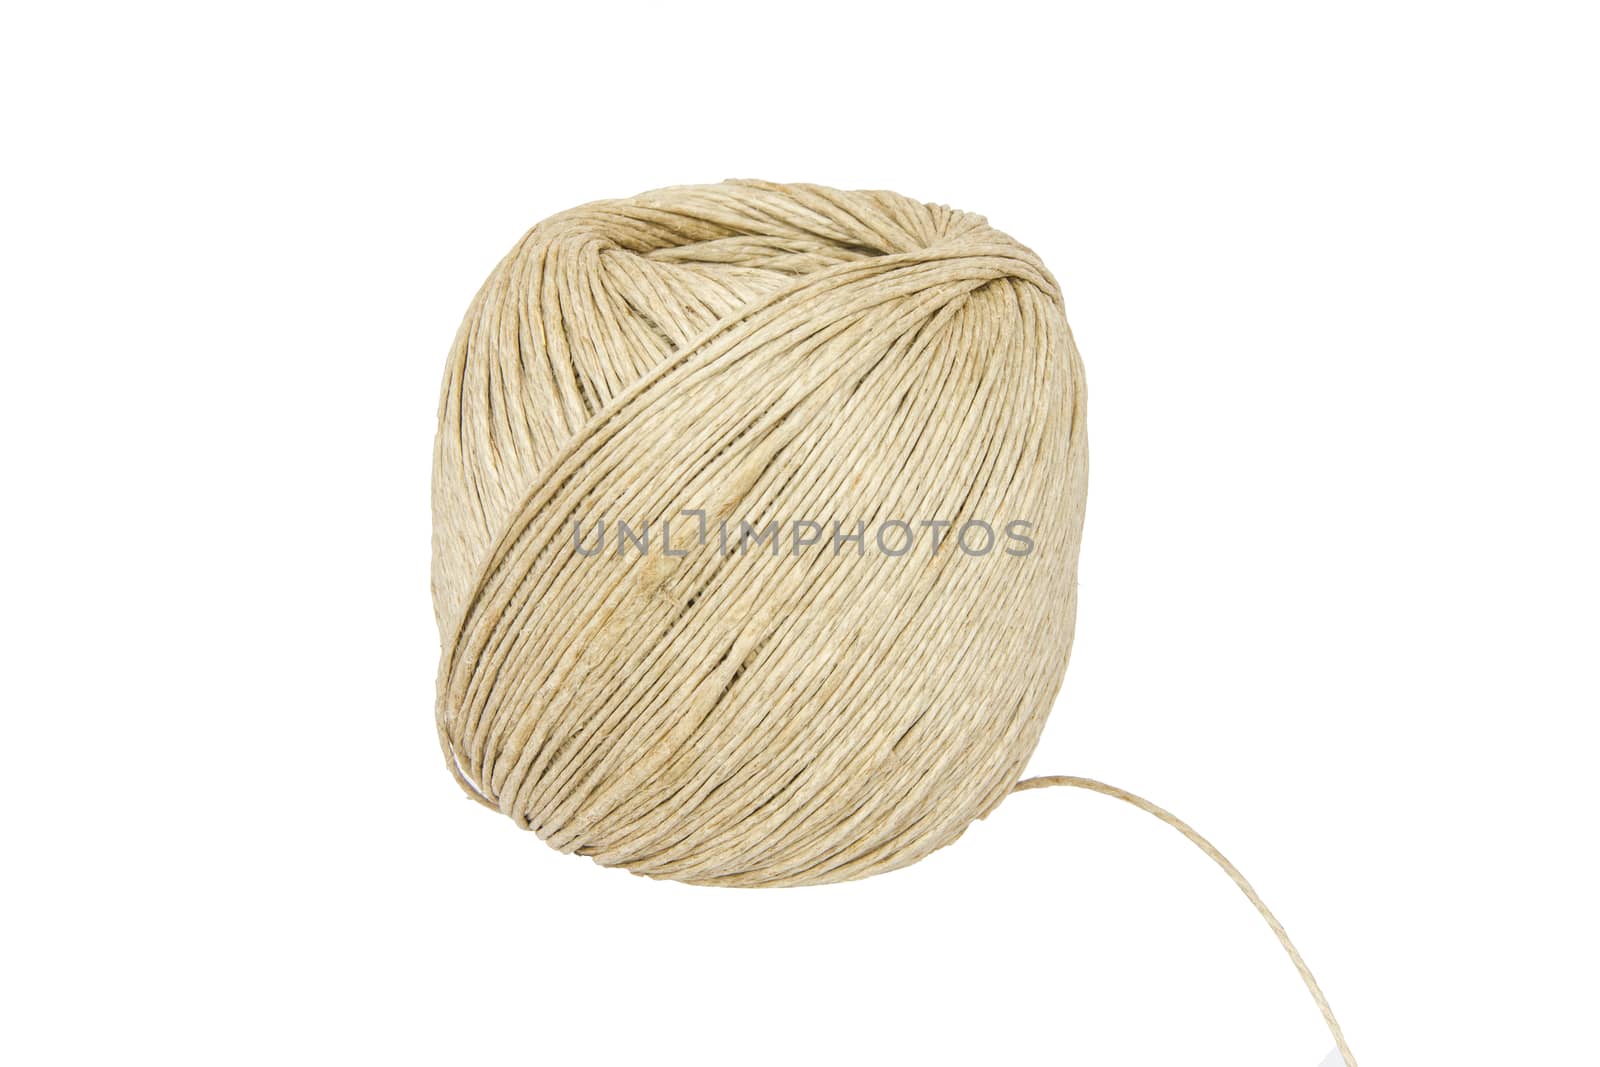 Ball of string isolated on white background by huntz